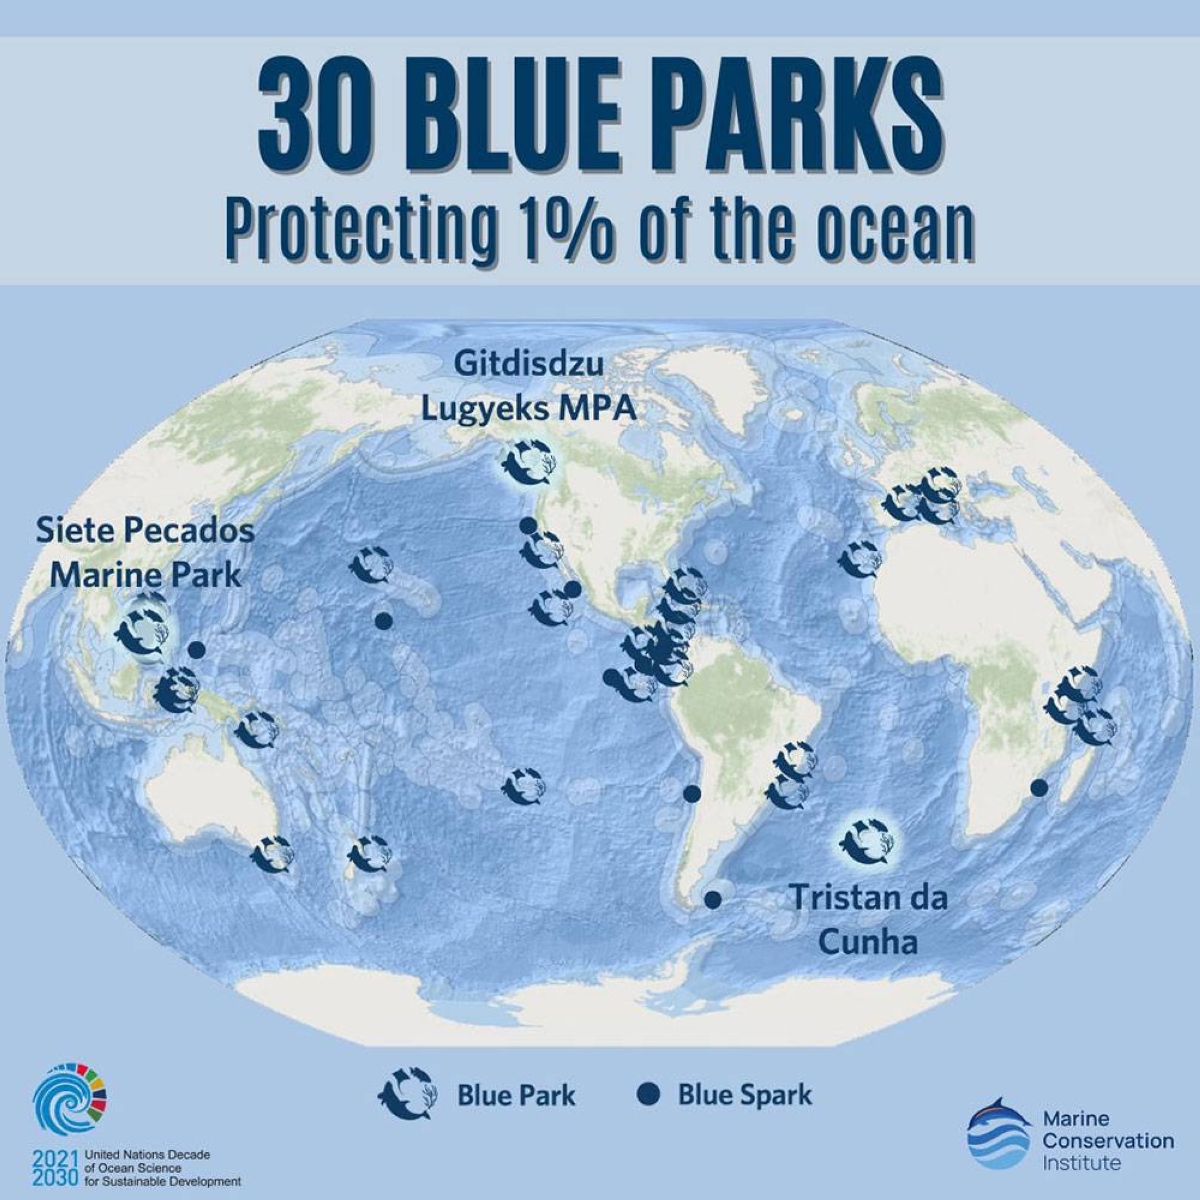 The three newest Blue Parks. FROM THE MARINE CONSERVATION INSTITUTE’S FACEBOOK PAGE